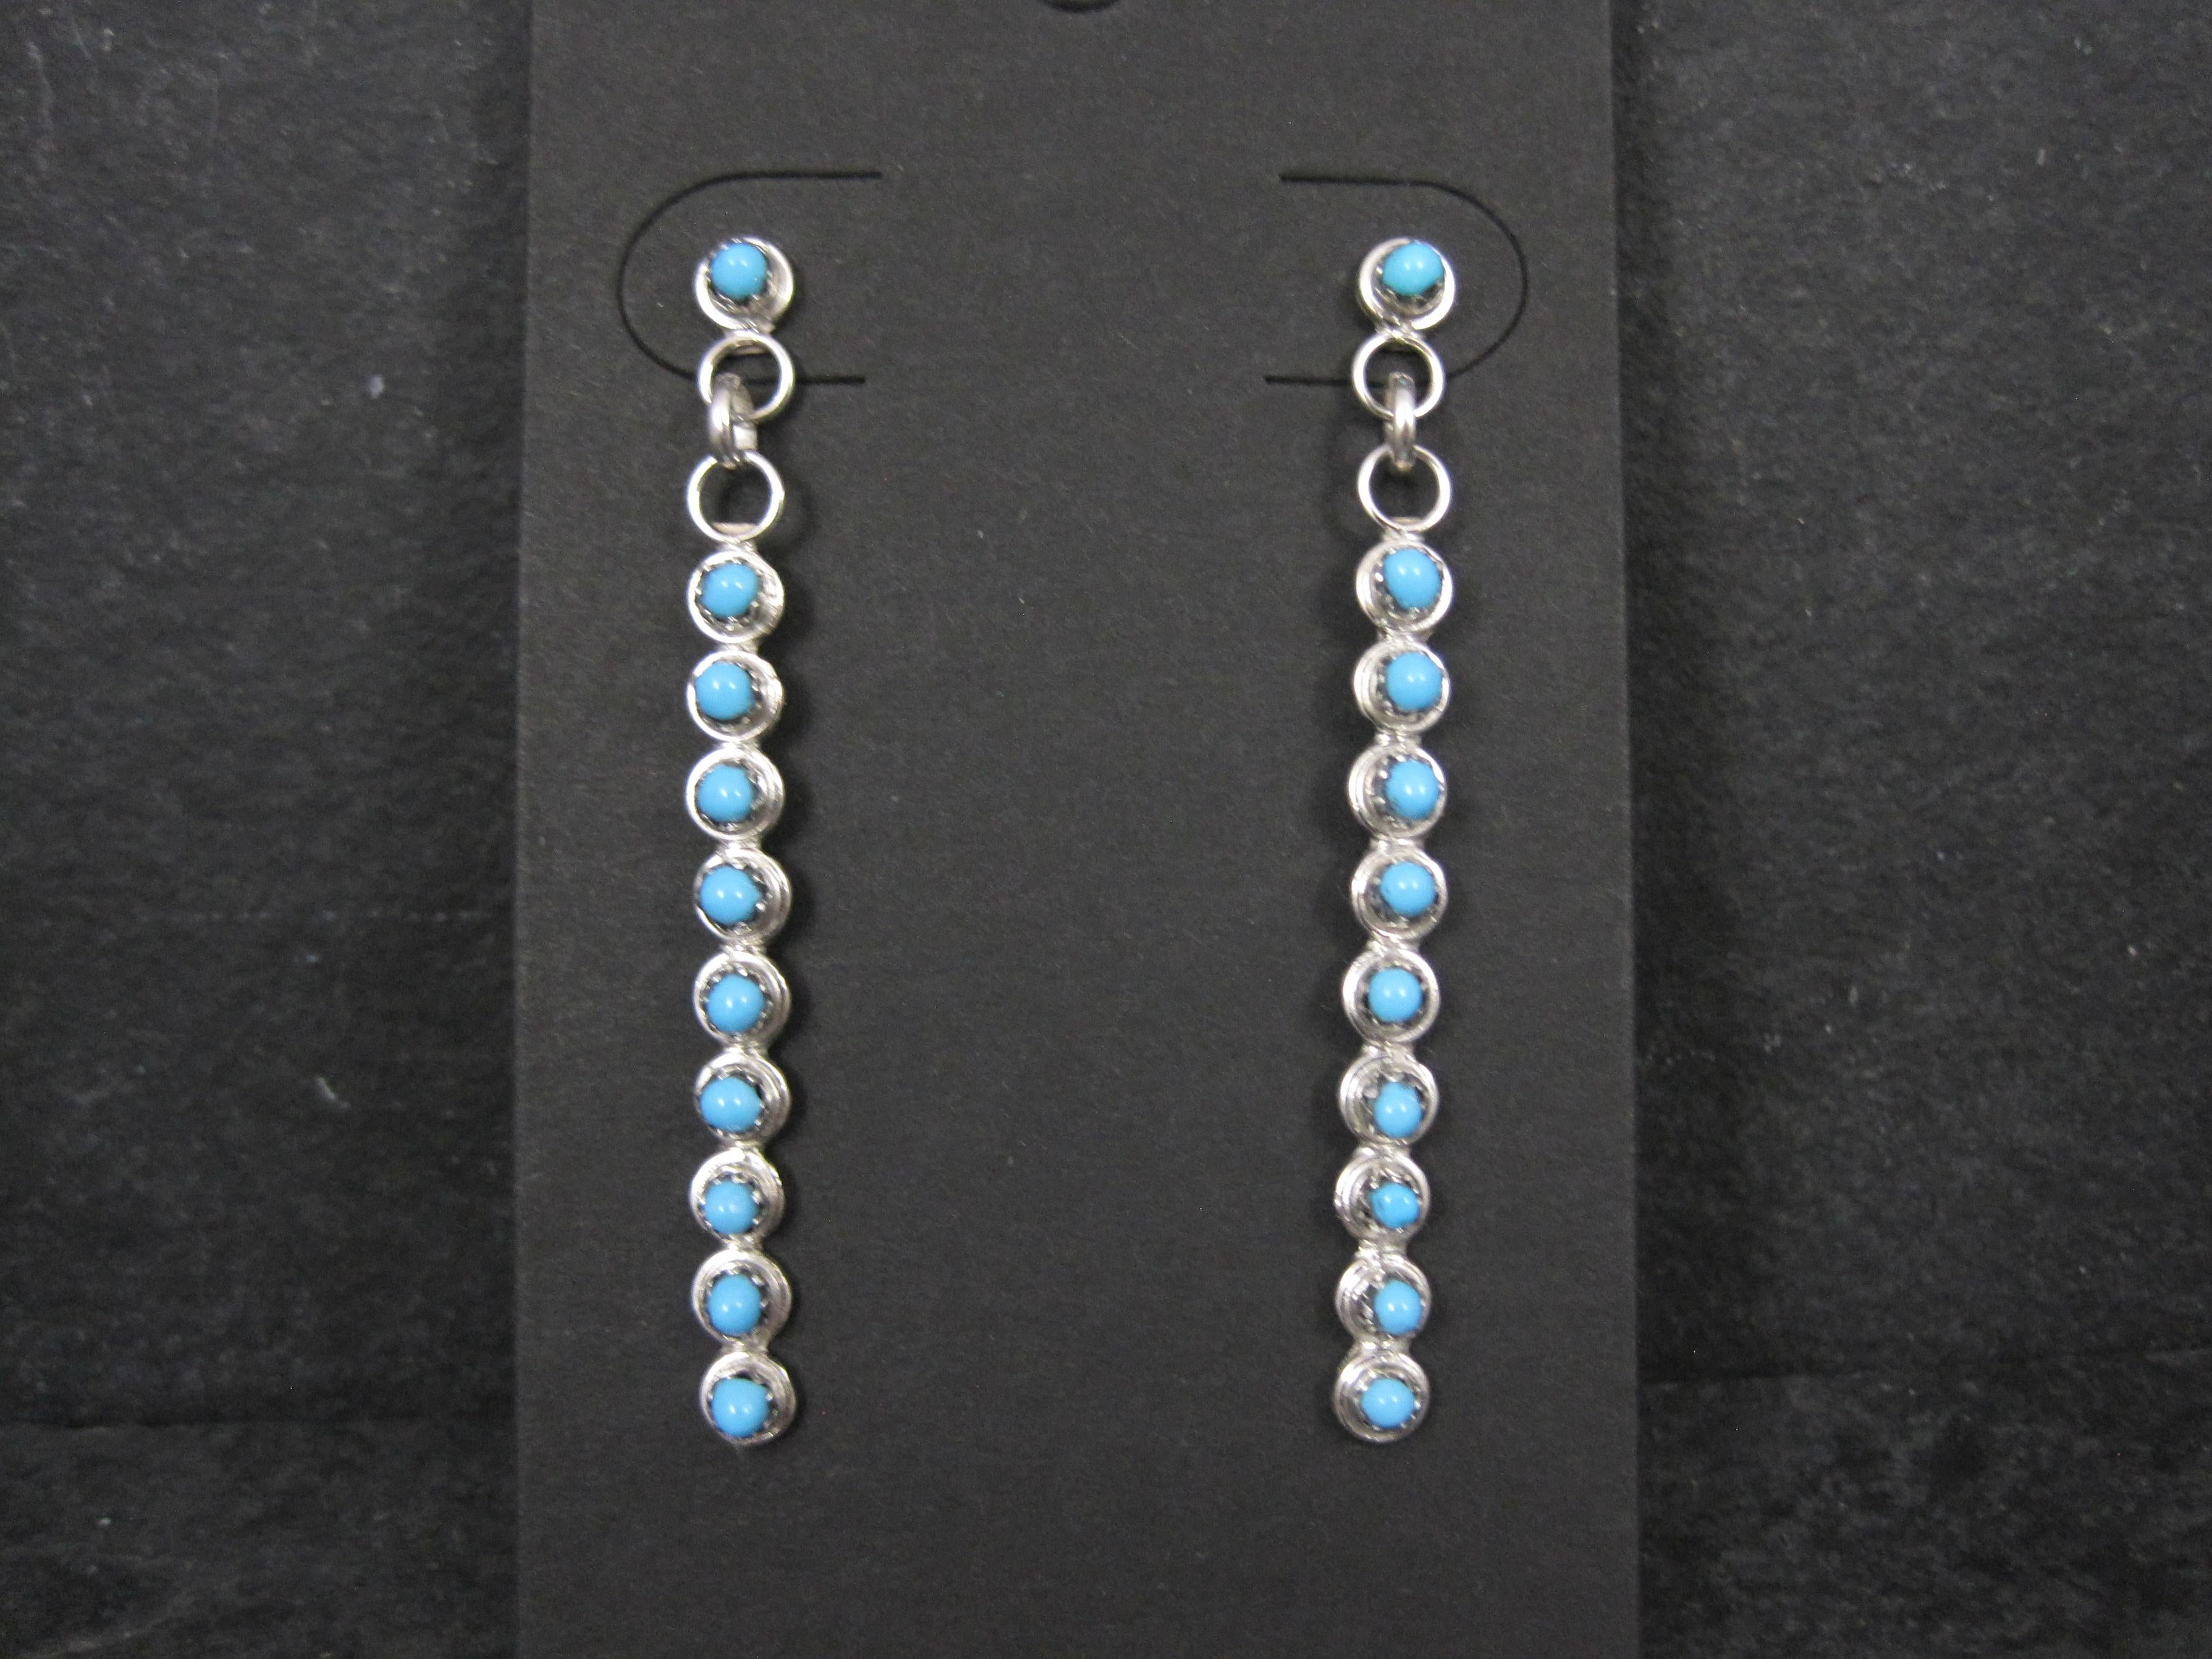 These gorgeous Southwestern earrings are sterling silver with snake eye cut turquoise gemstones.
Made by Zuni silversmith Henrietta Quetawki.

Measurements: 3/16 by 2 inches
Weight: 3.5 grams

Condition: New